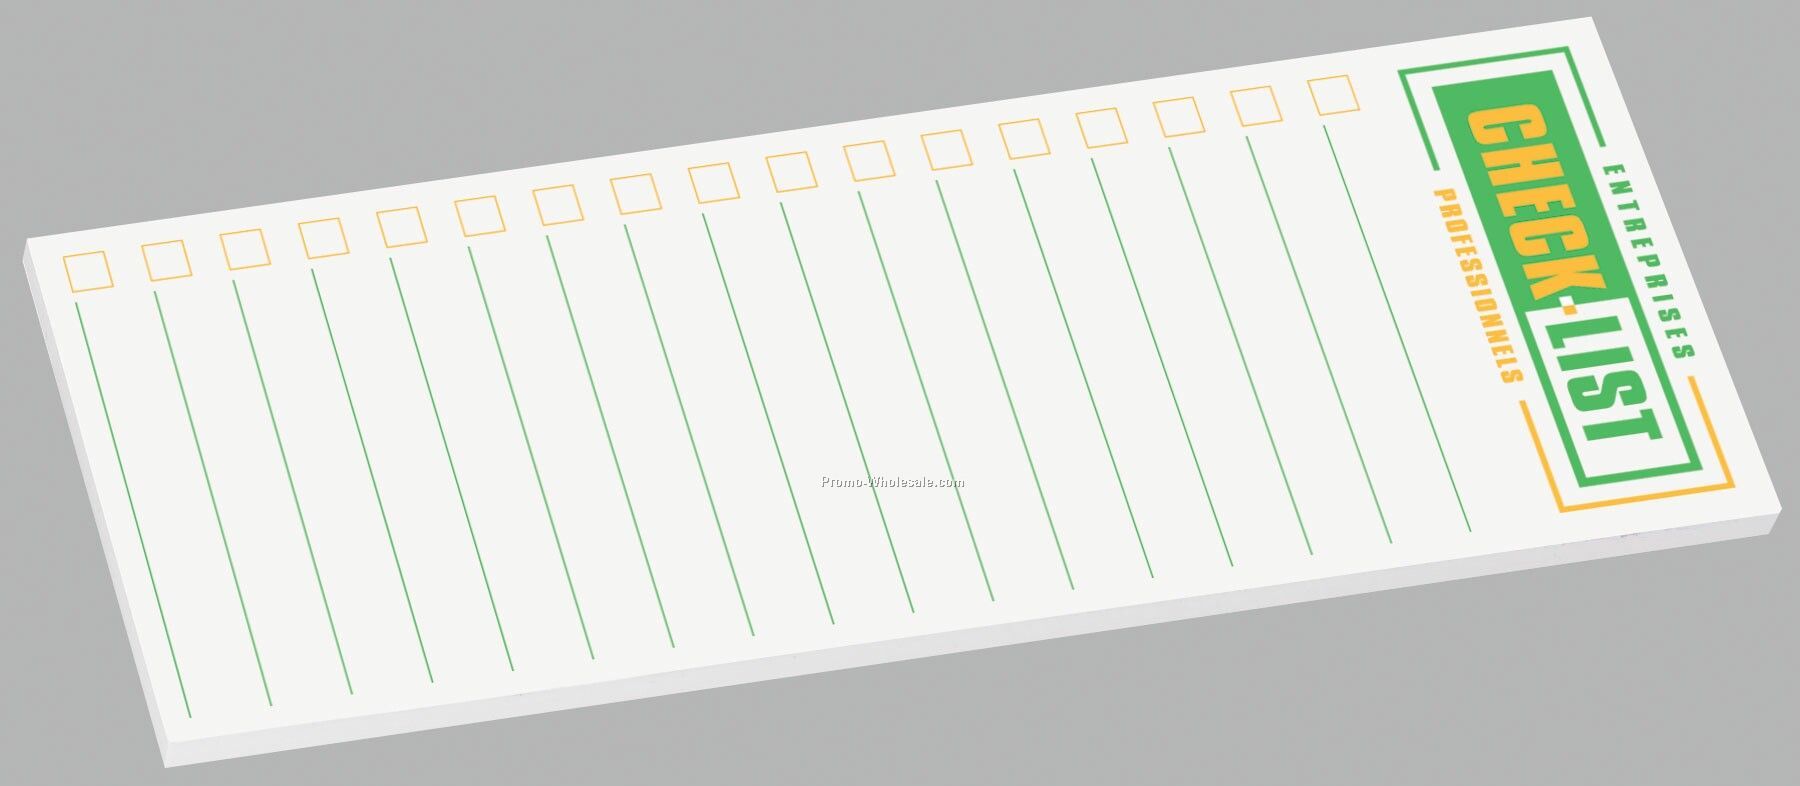 8"x3" Earth Friendly Adhesive Notes (50)